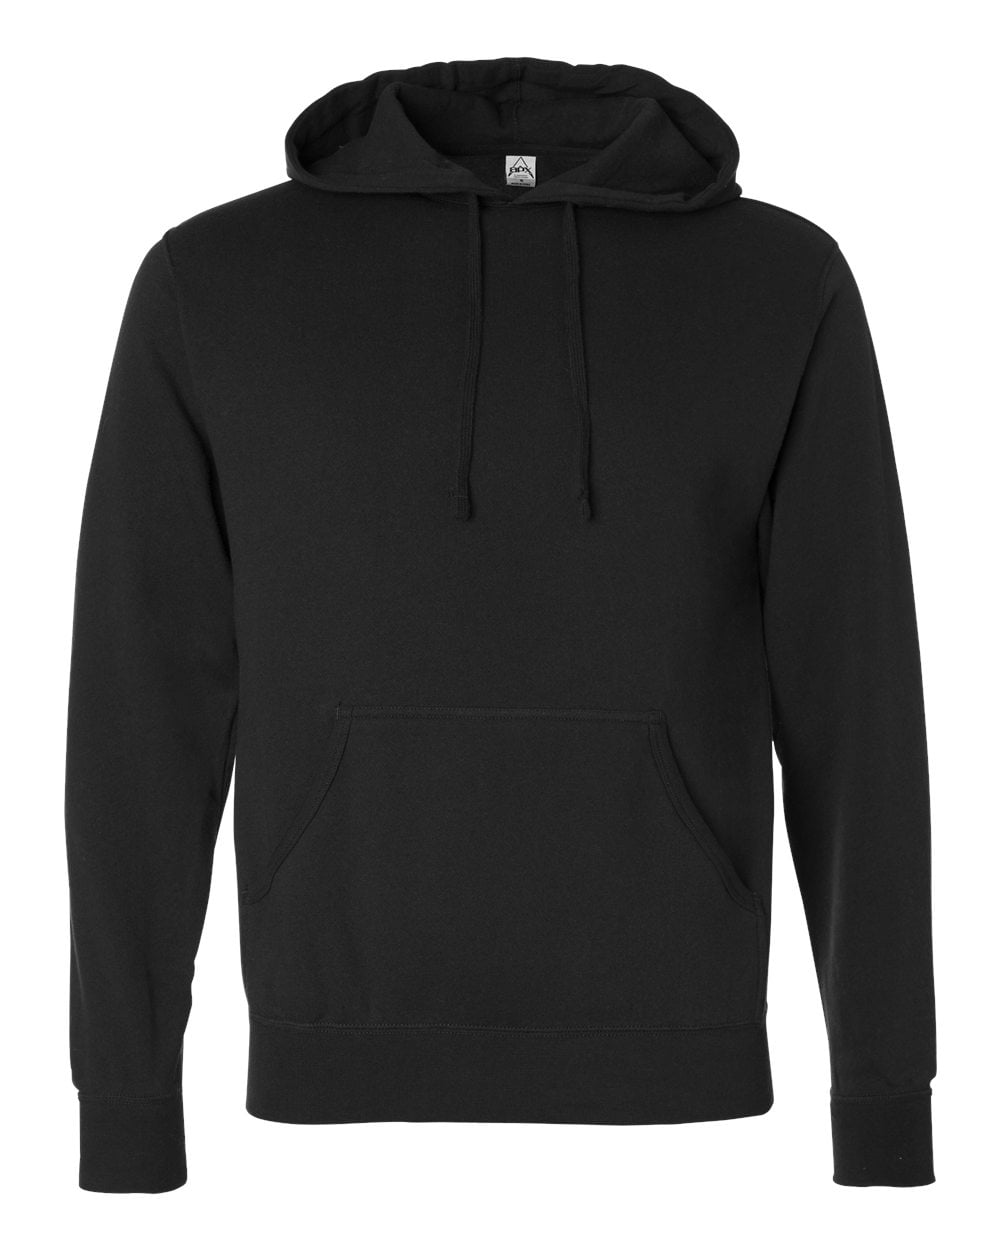 Independent Trading Co. - ITC AFX4000 Men's Hooded Pullover Sweatshirt ...